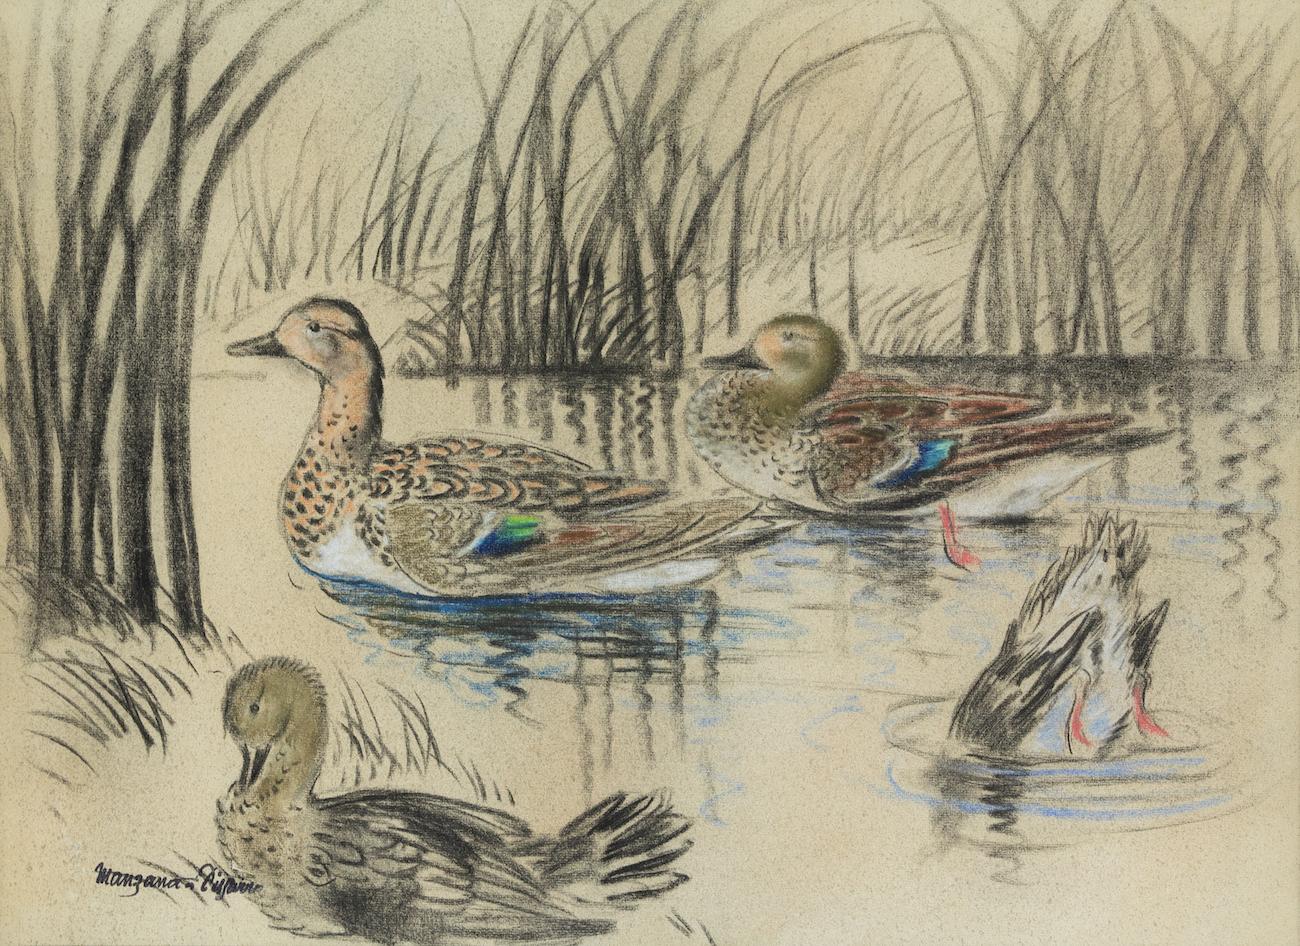 Wild Ducks by Georges Manzana Pissarro (1871 - 1961)
Charcoal and pastel on paper
46 x 62 cm (18 ⅛ x 24 ⅜ inches)
Estate stamp lower left Manzana Pissarro
Executed circa 1920

This work is accompanied by a certificate of authenticity issued by Lélia